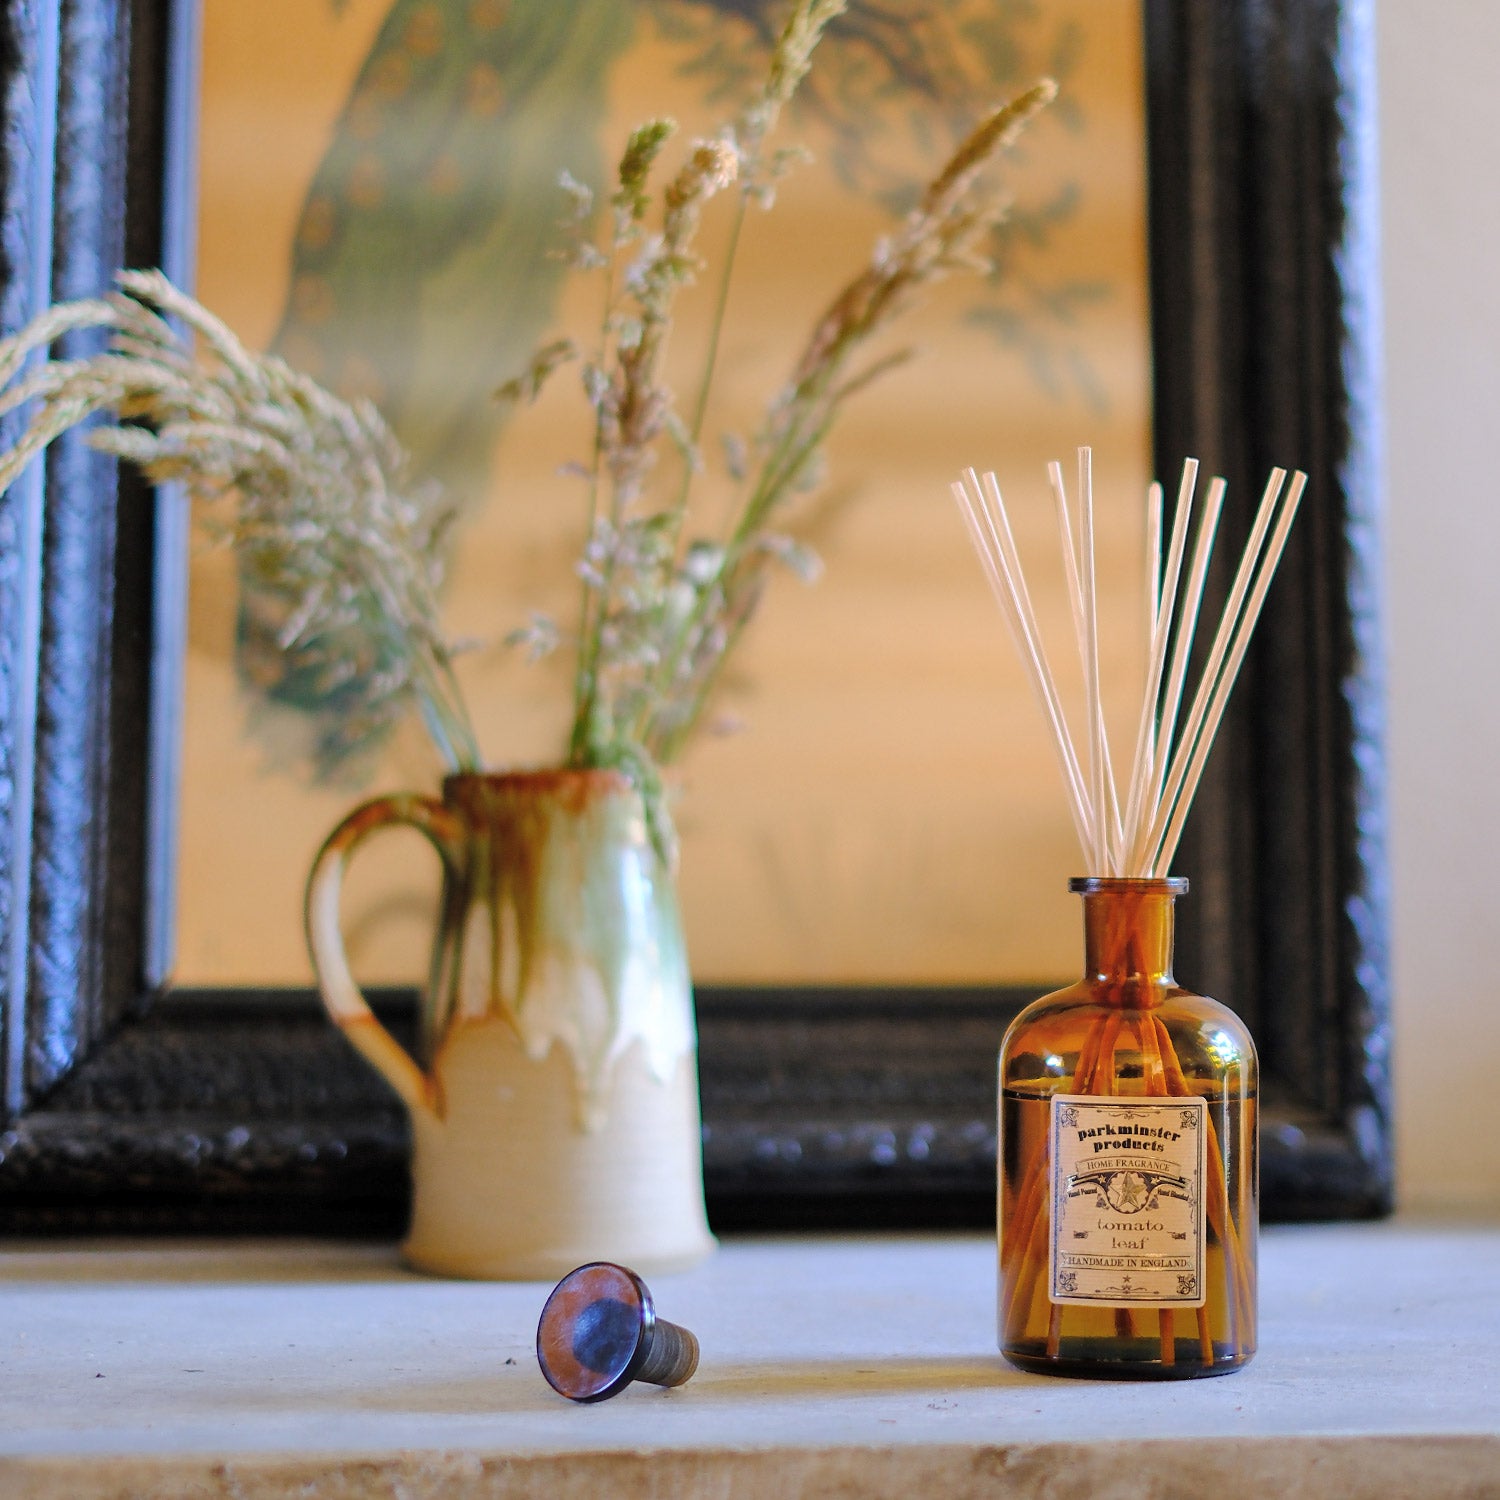 Refresh your home with the unique and invigorating scent of Tomato Leaf from Parkminster's 200ml amber glass Apothecary Reed Diffuser. Made by hand in our Cornish workshop with 100% plant-based ingredients, this diffuser offers a modern and green herbal fragrance solution.